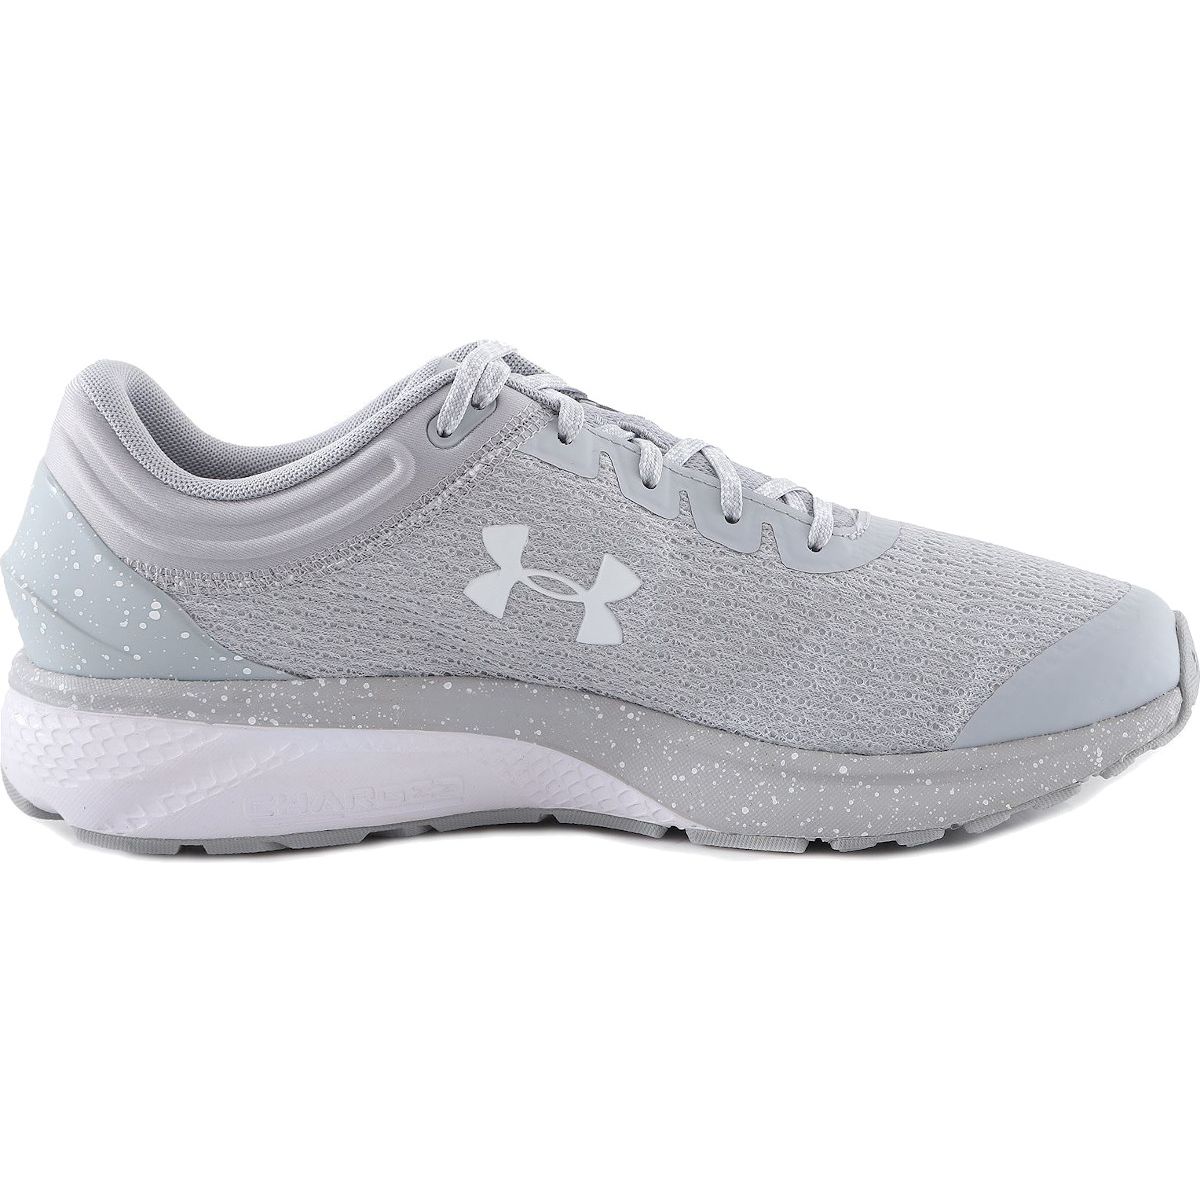 Under Armour Charged Escape 3 Men's Running Shoes 3021949-10